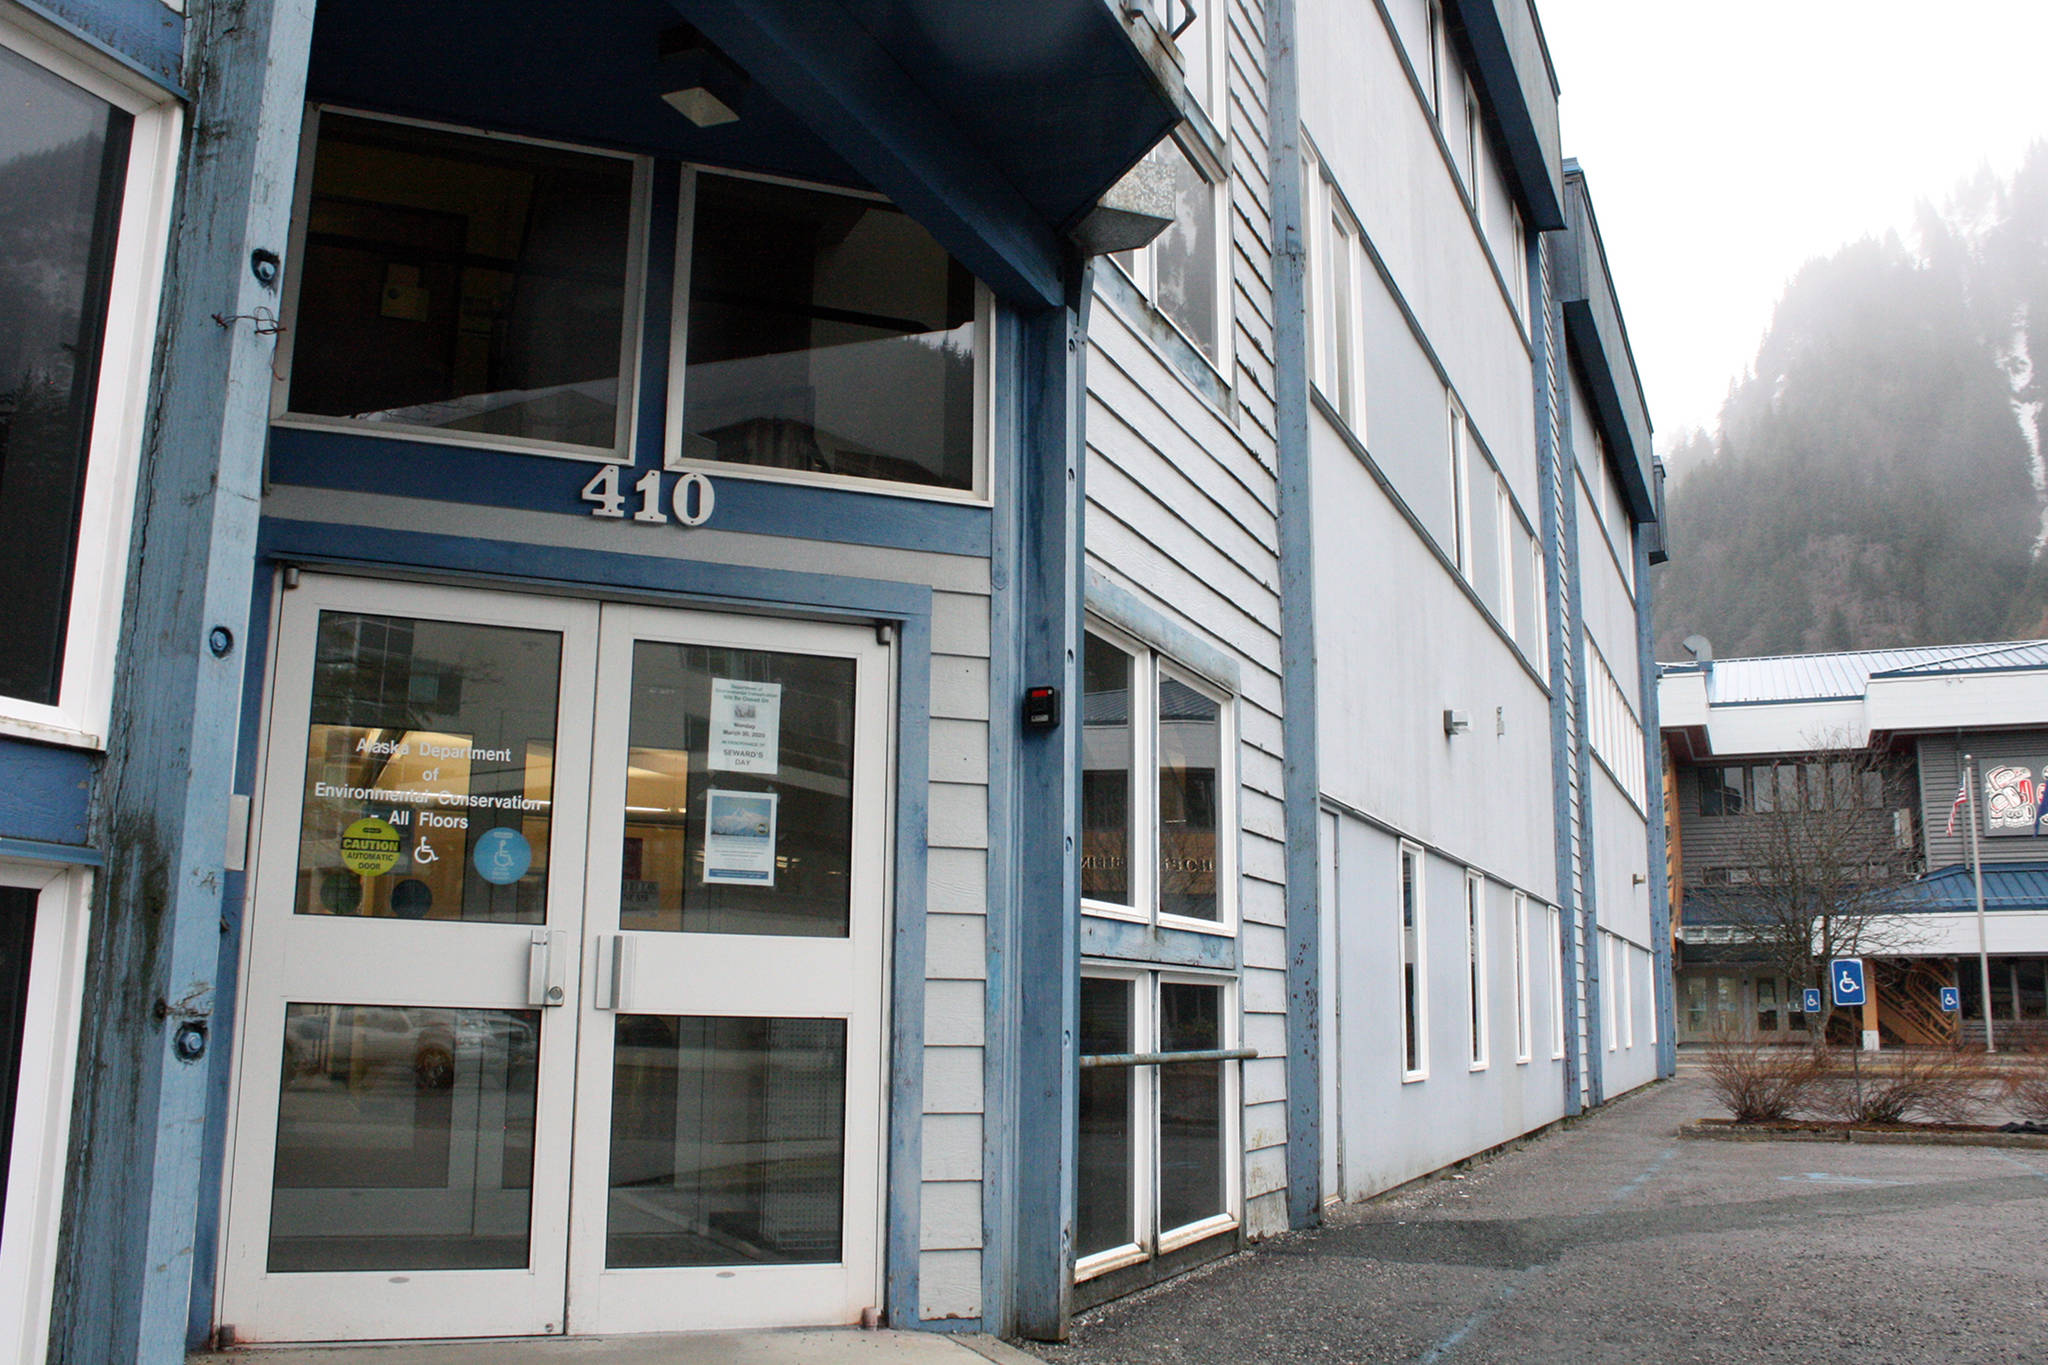 A patient, who tested positive for the coronavirus, had contact with the first floor of the state office building at 410 Willoughby Ave., according to an email from DEC Commissioner Jason Brune. (Ben Hohenstatt | Juneau Empire)